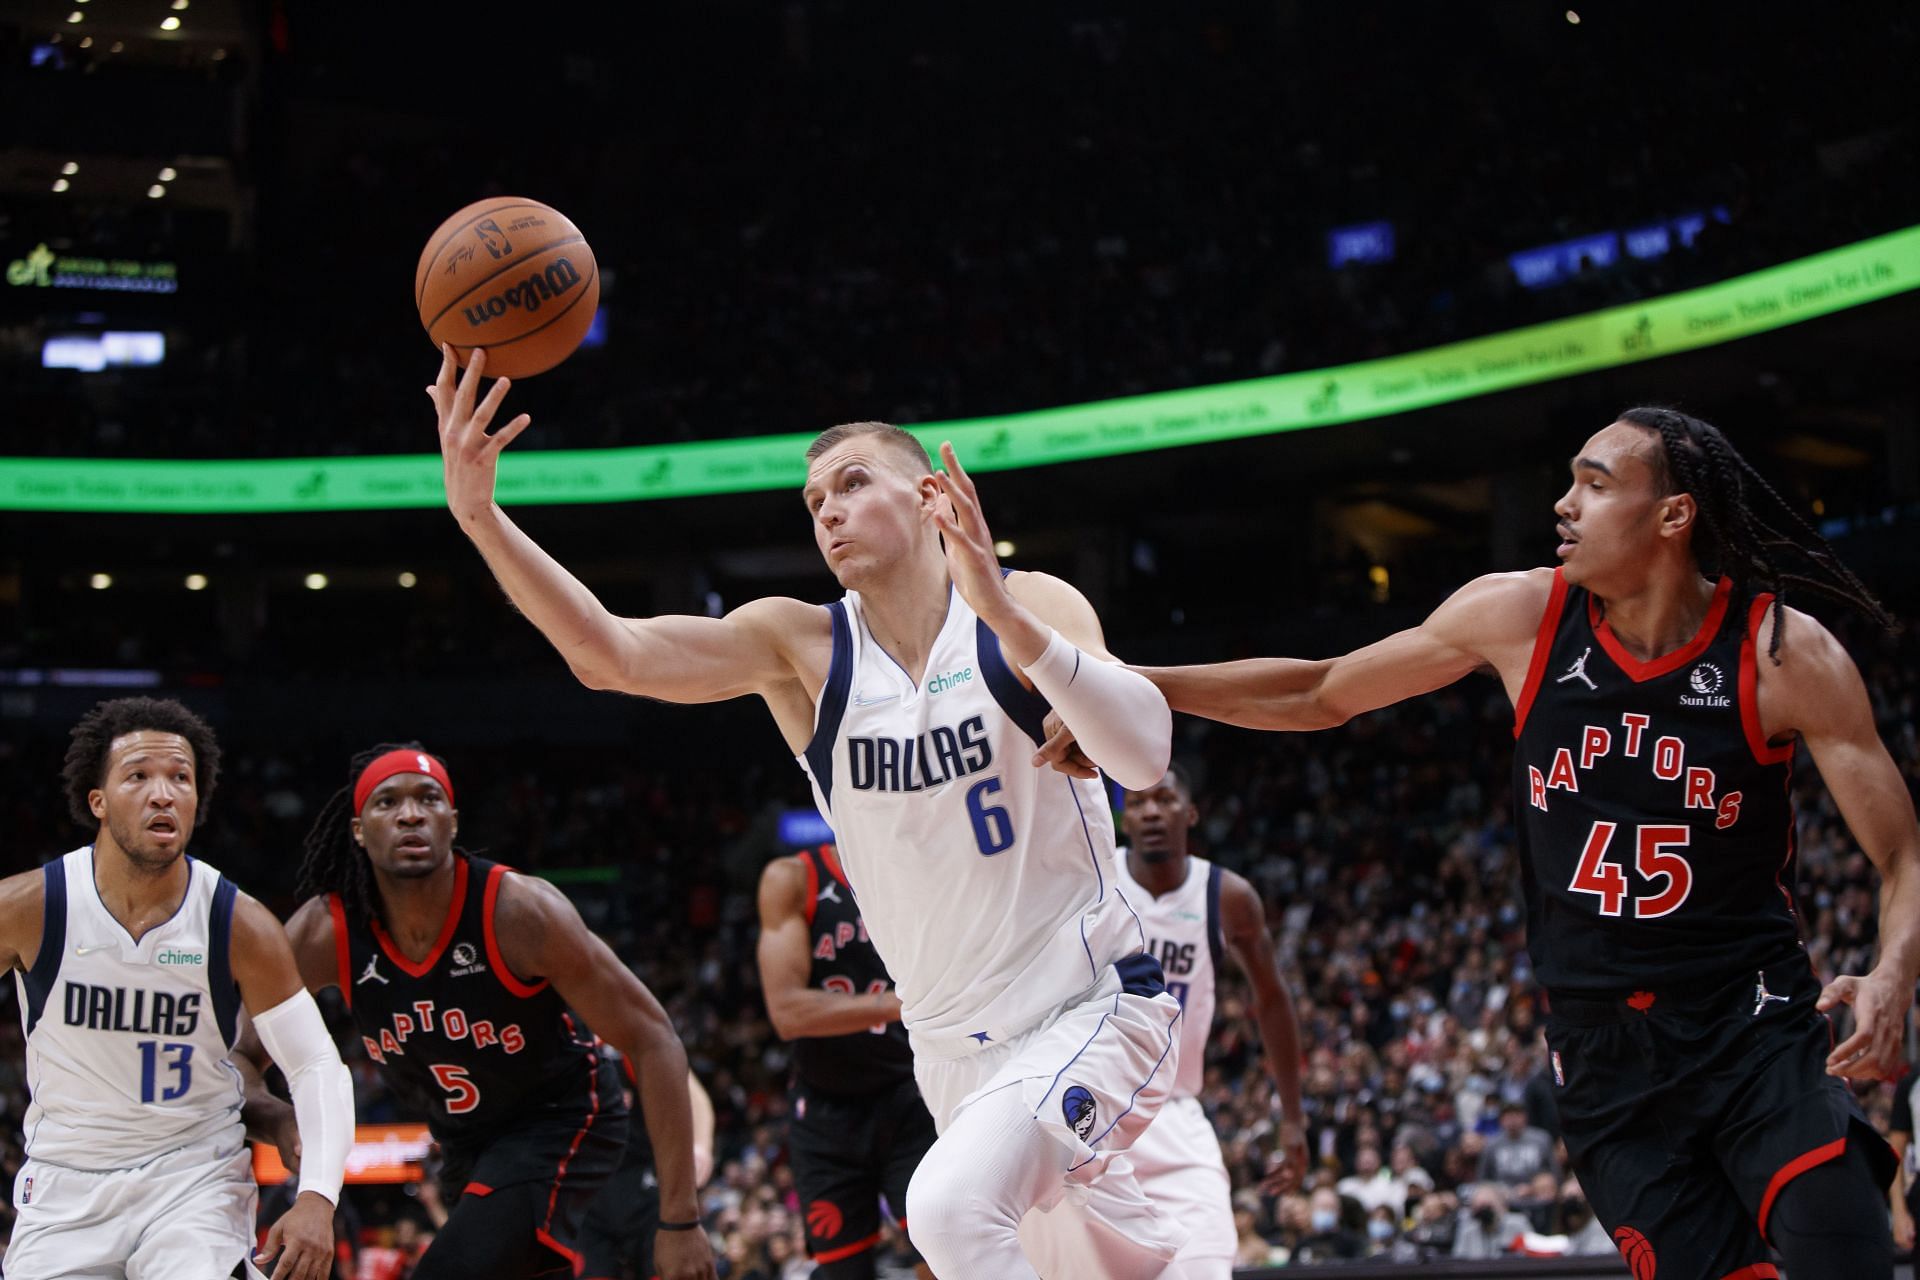 A snap from the Dallas Mavericks&#039; game against the Toronto Raptors.